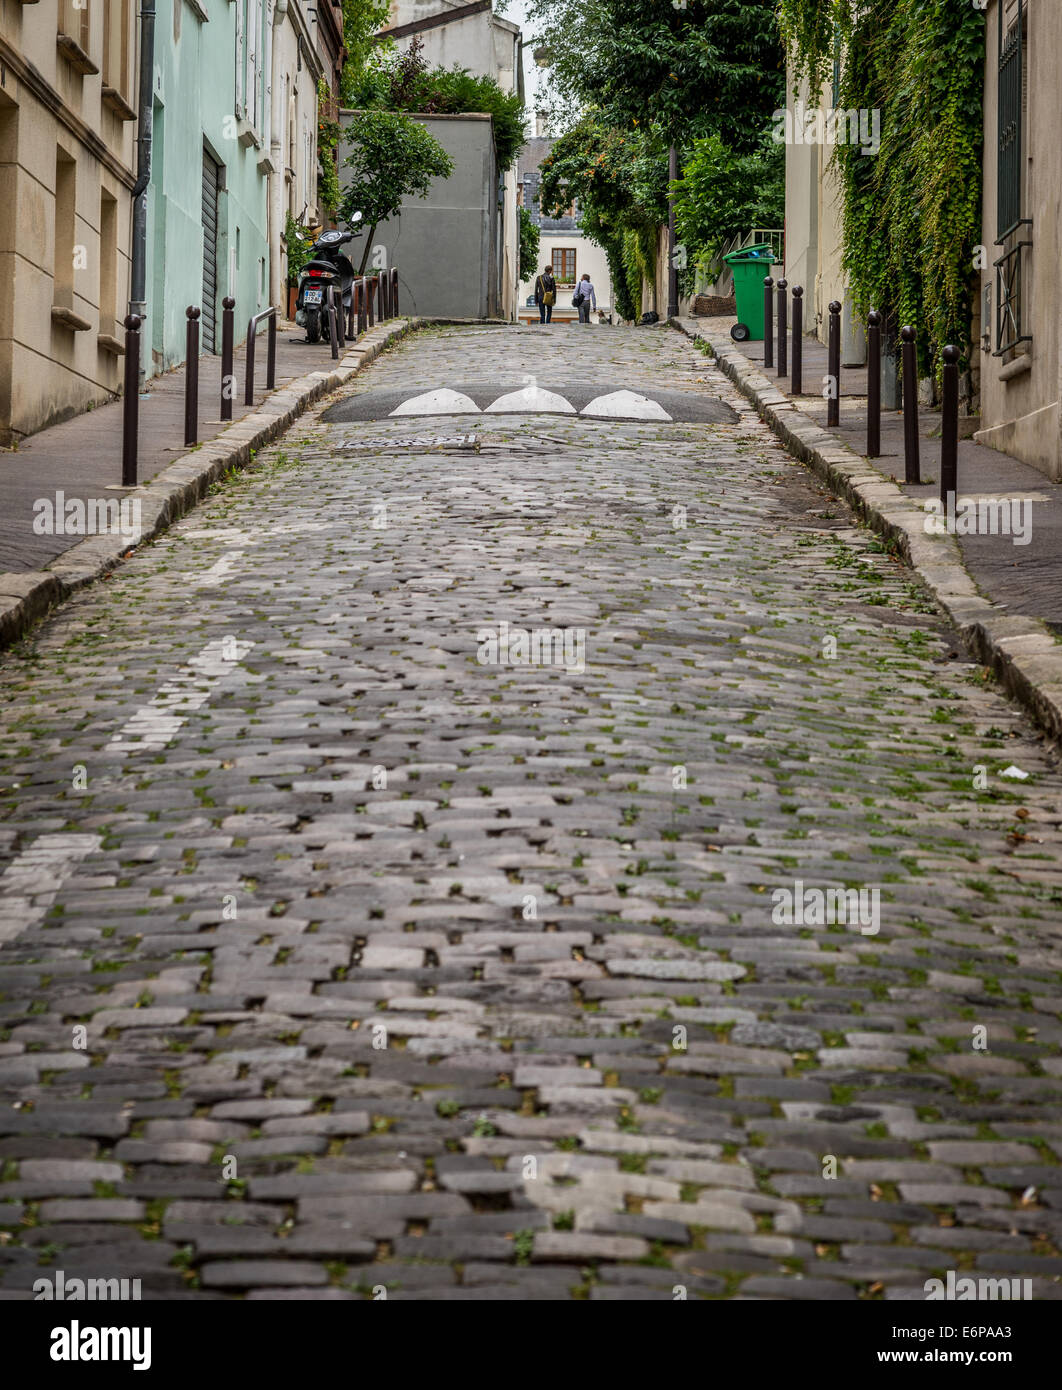 Two men reach the top of a hill on a cobble stone street in Paris France. Stock Photo